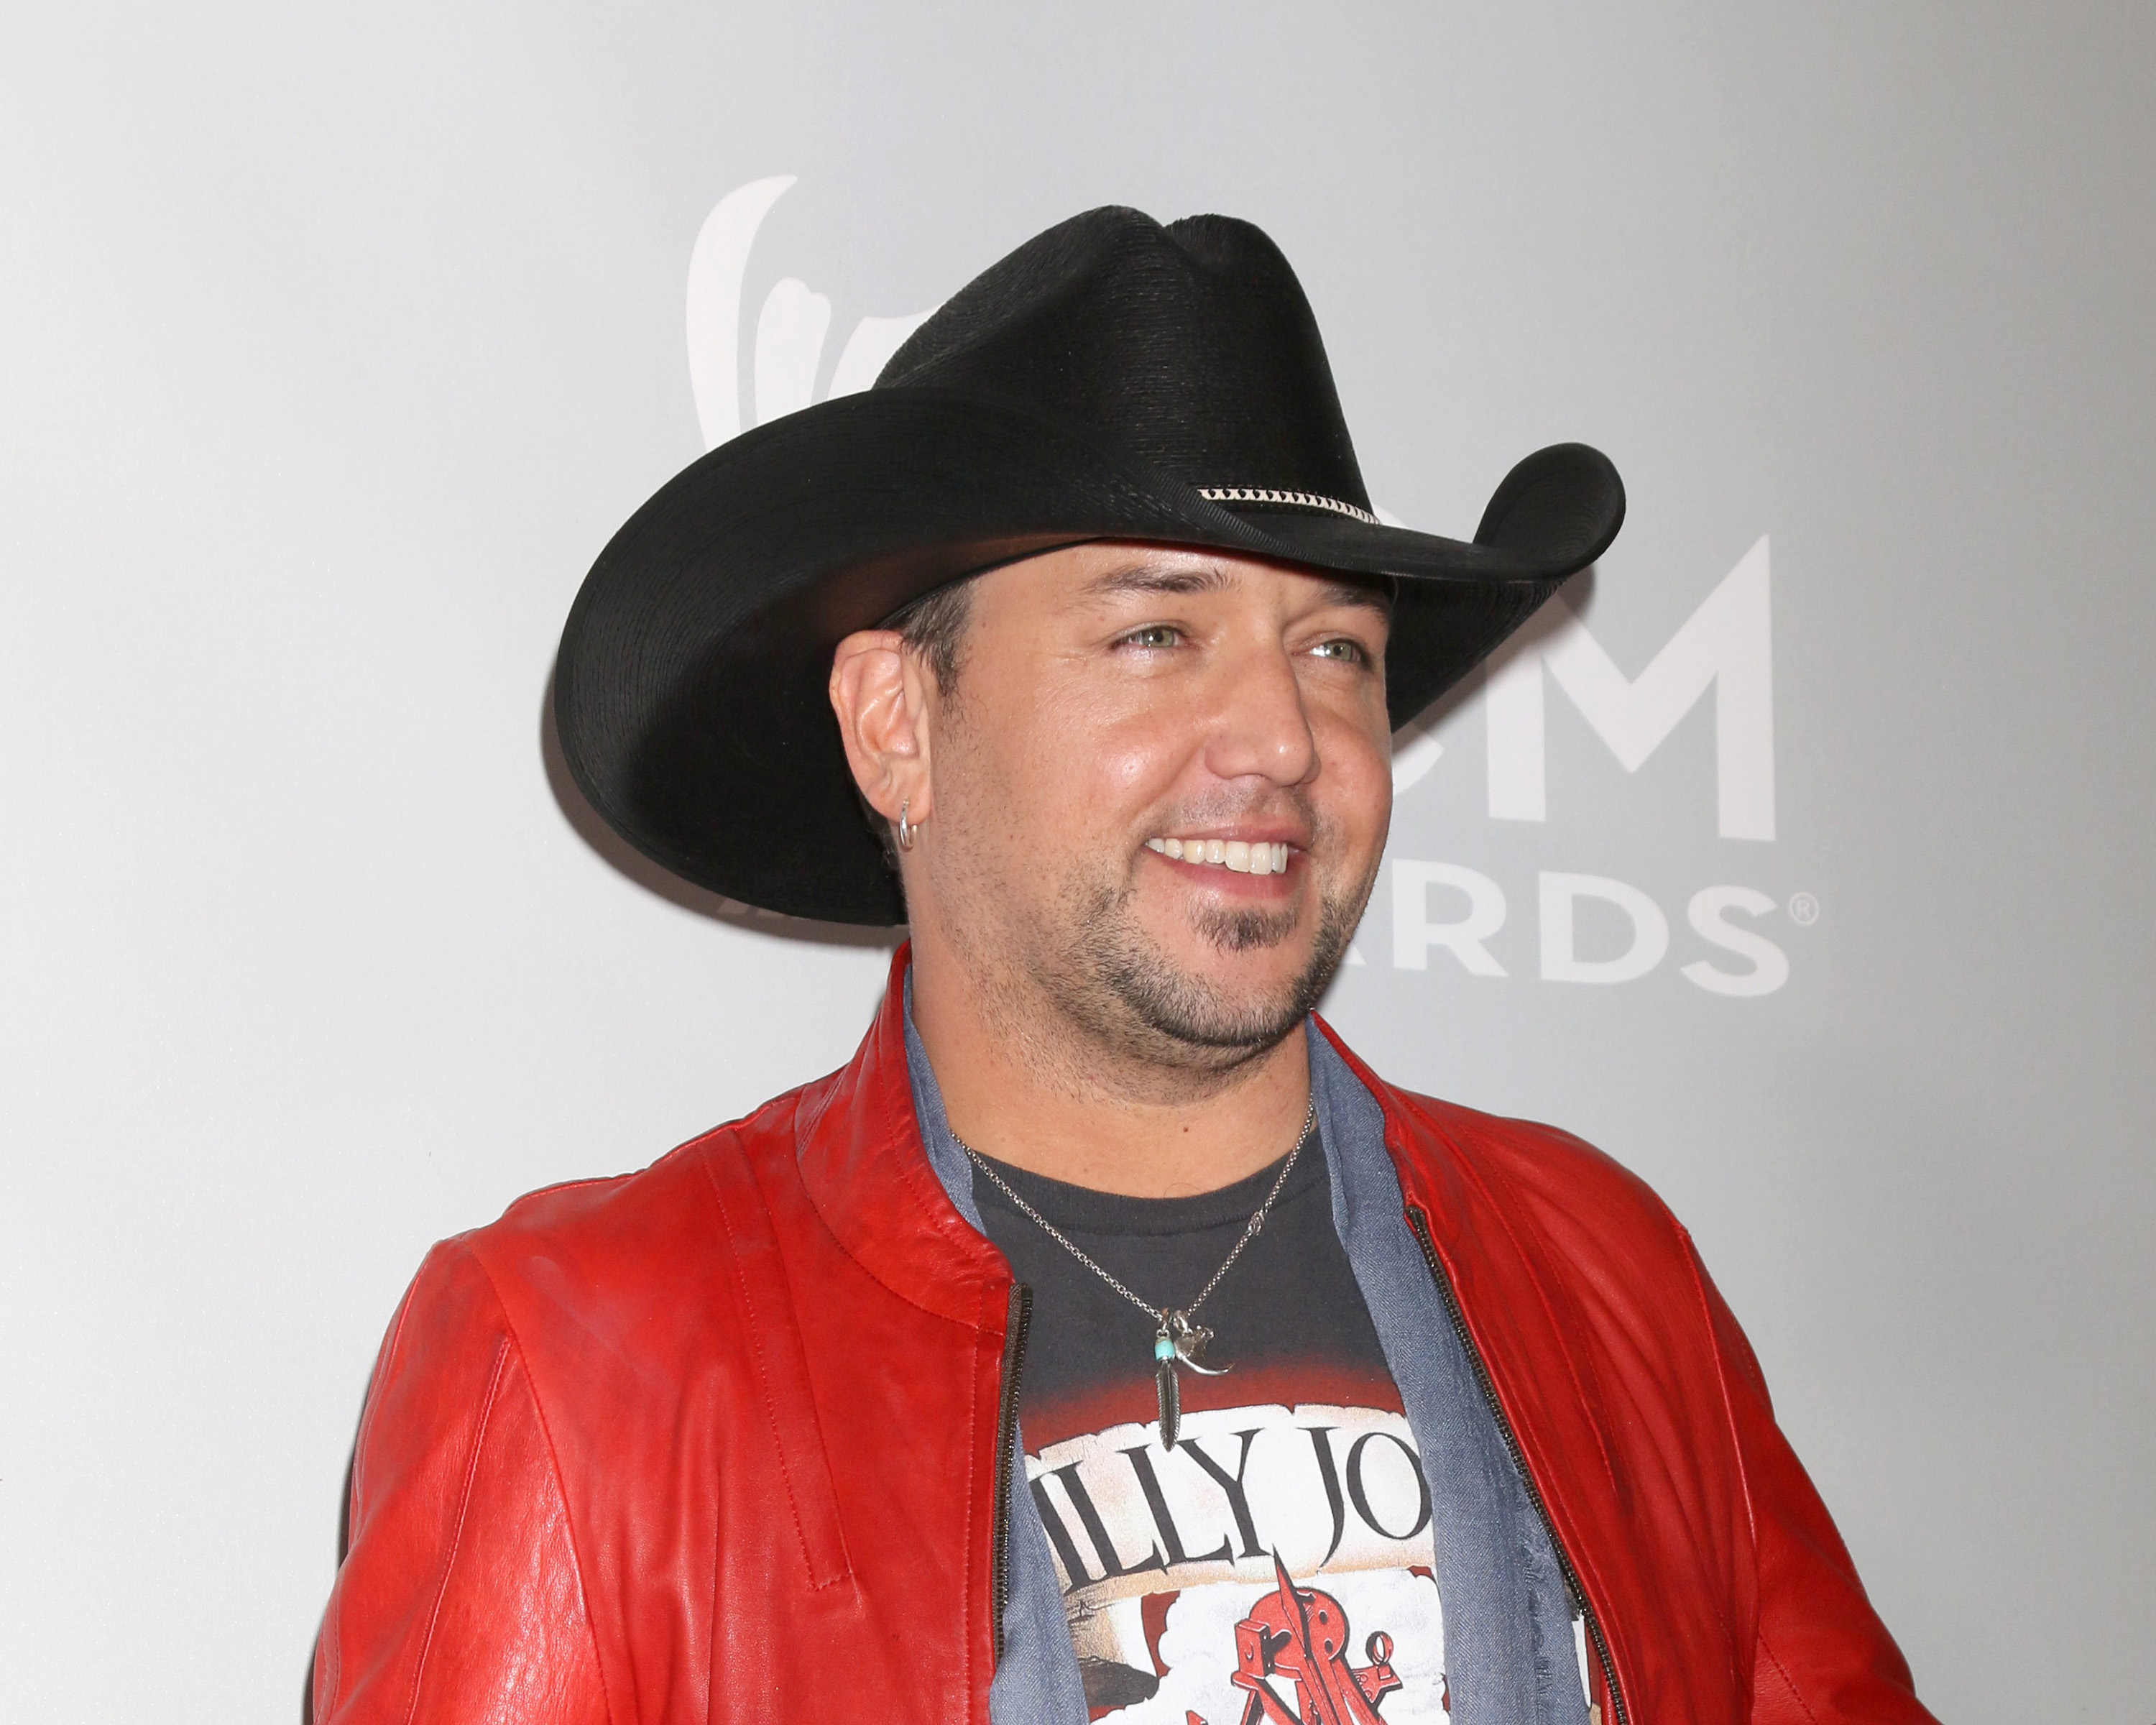 Jason Aldean - American Country Music Singer Celebrities Who Live In Nashville